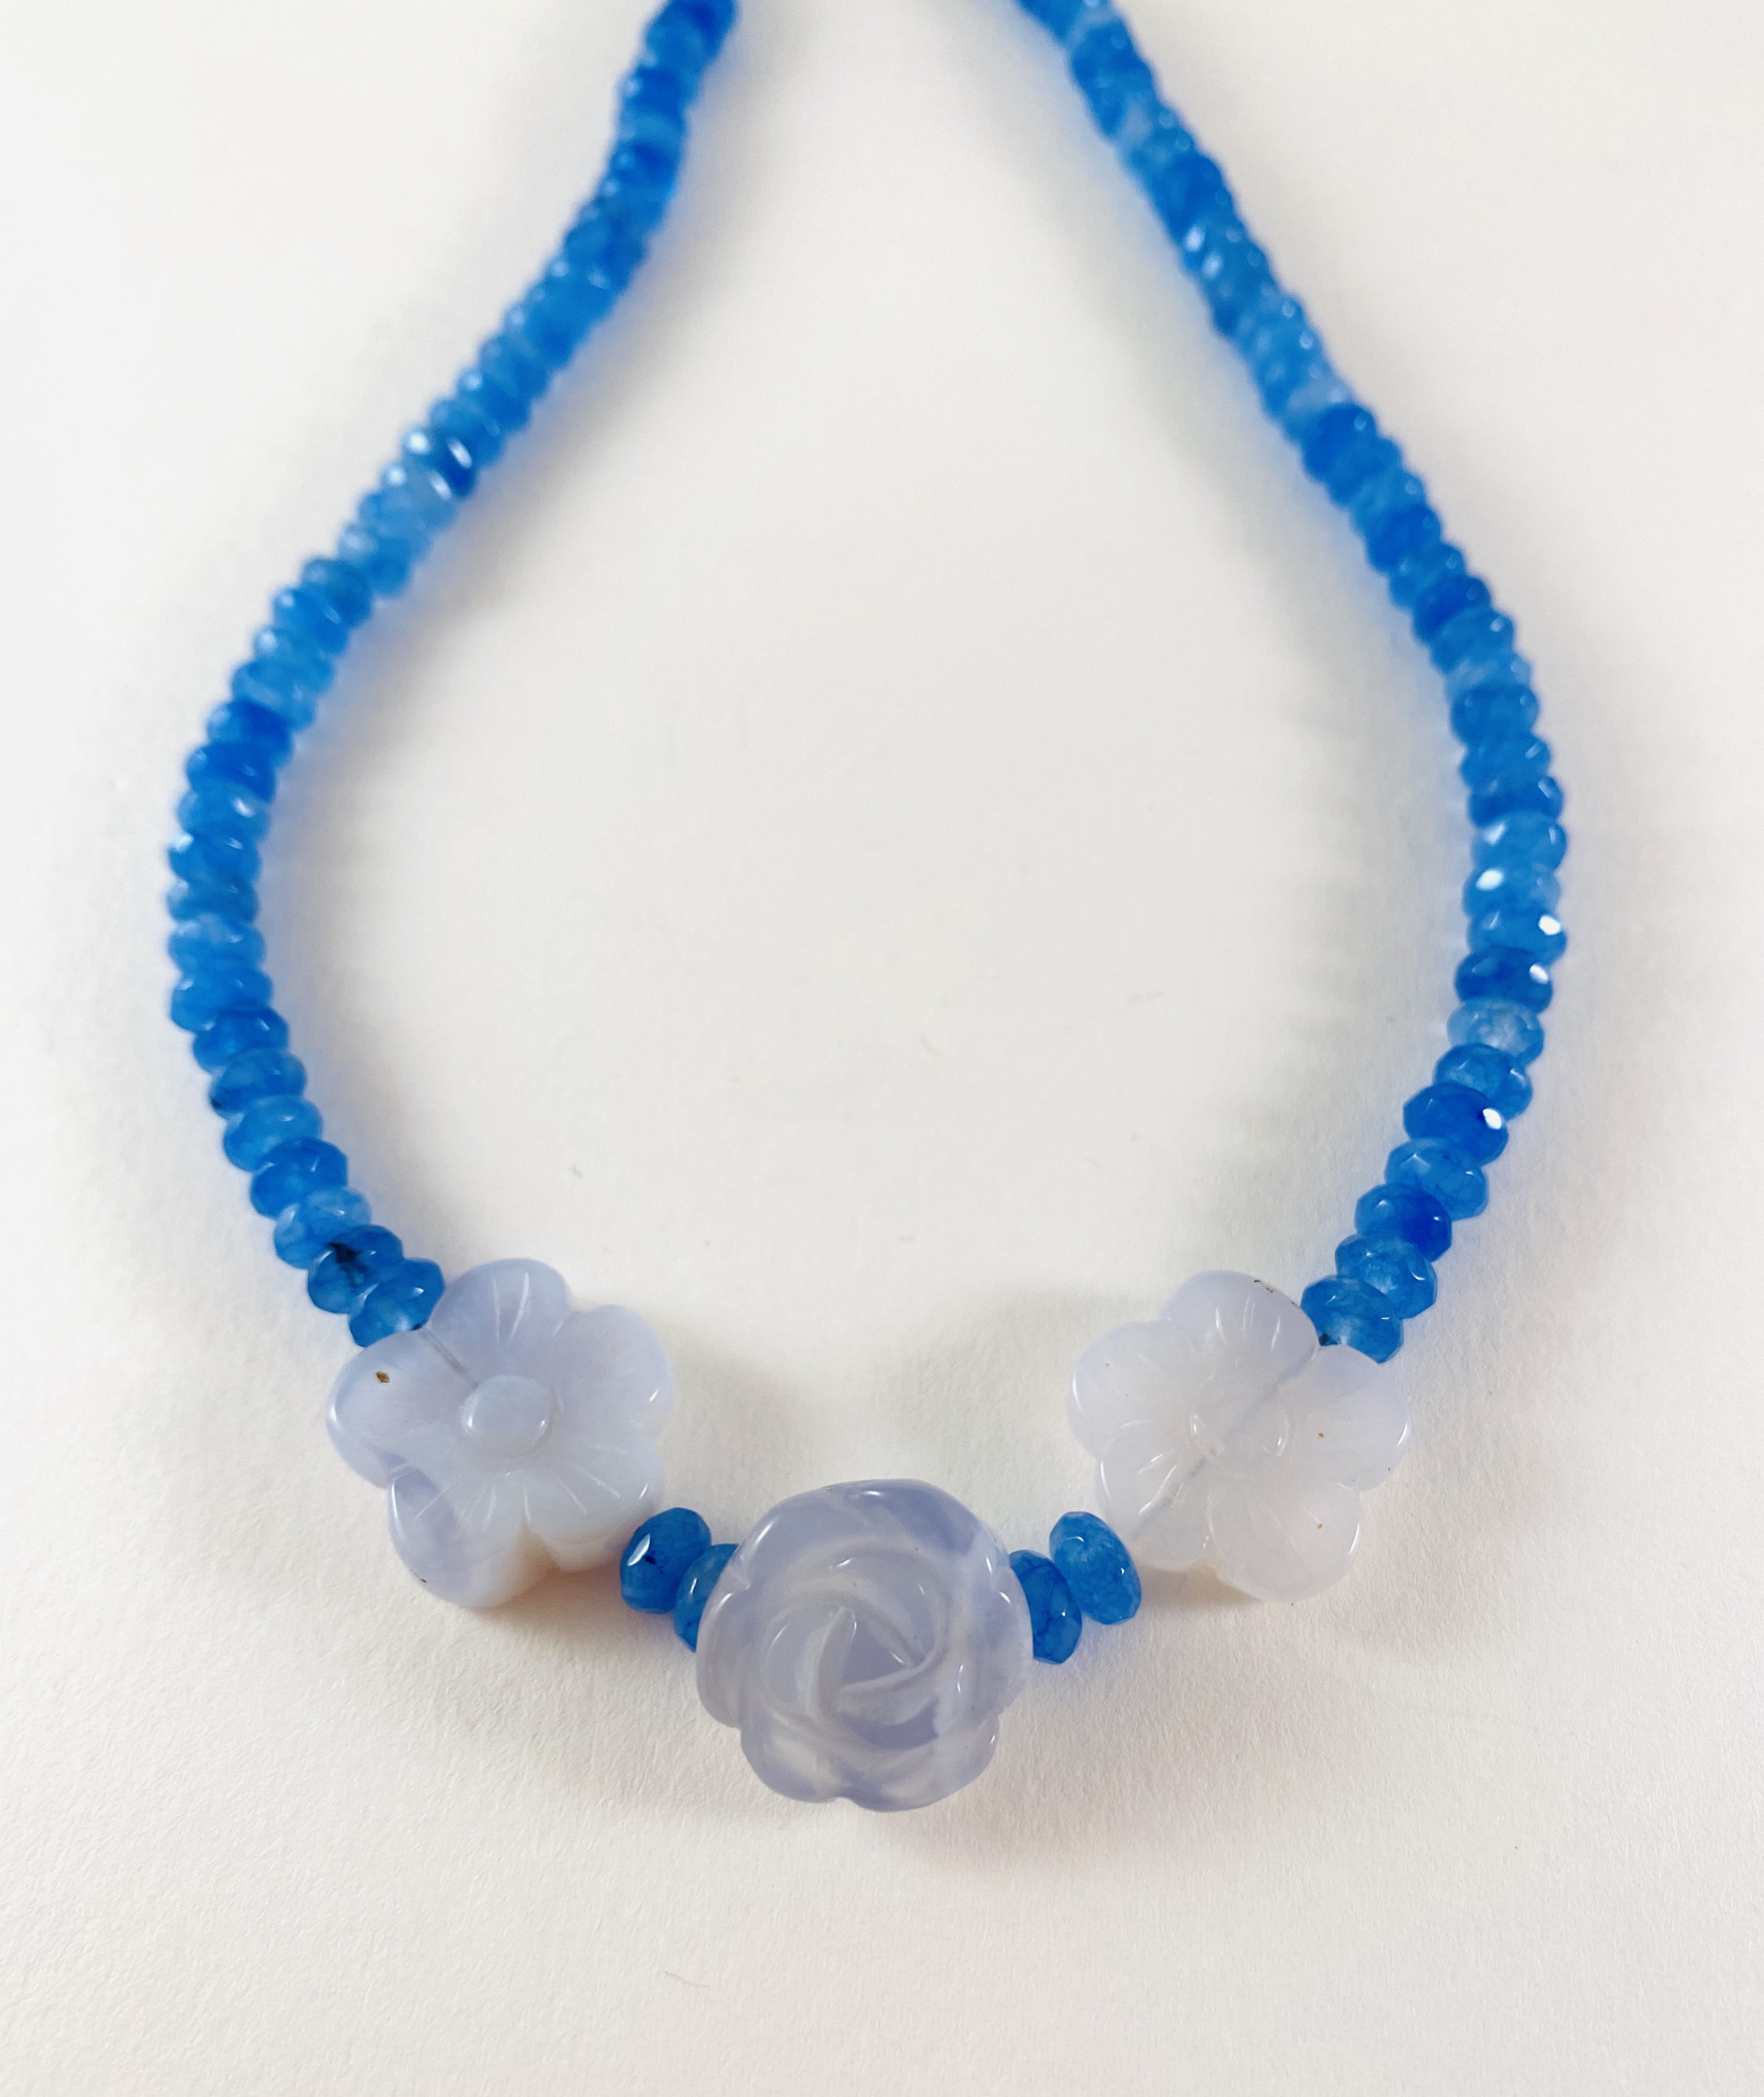 Faceted Blue Jade, Carved Blue Chalcedony Necklace by Nance Trueworthy